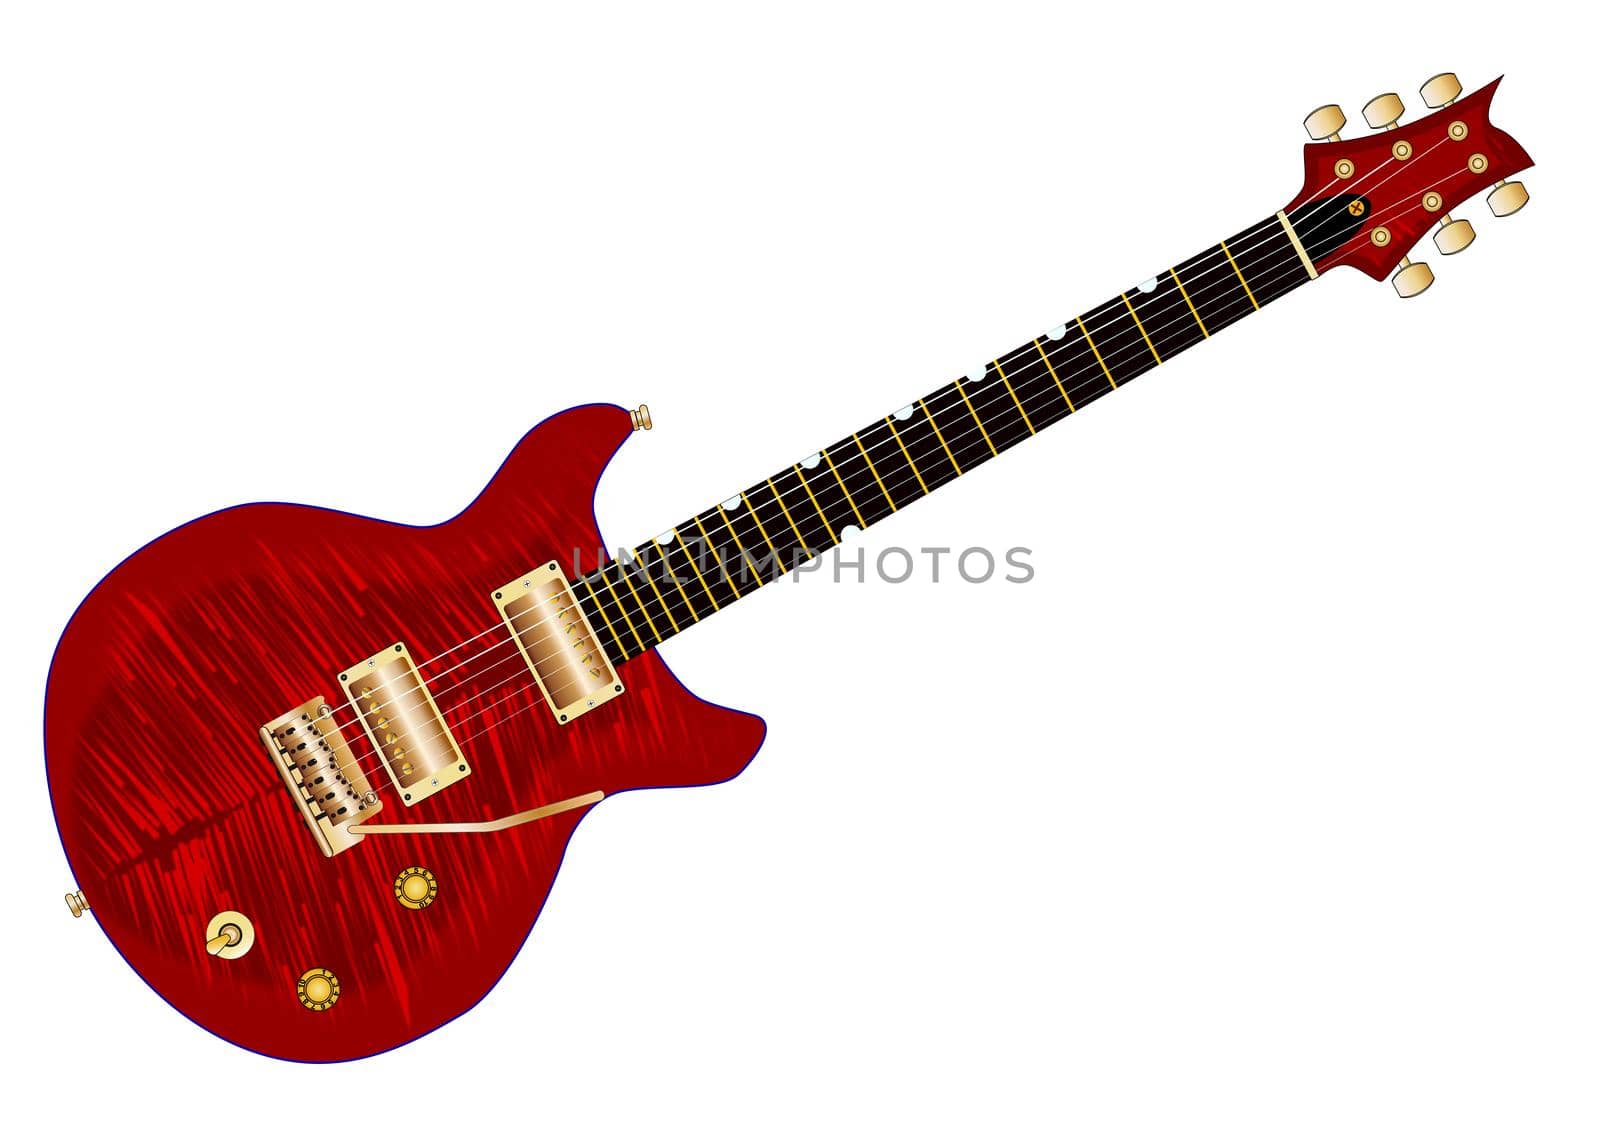 A typical double cutaway electric guitar in red set over a white background